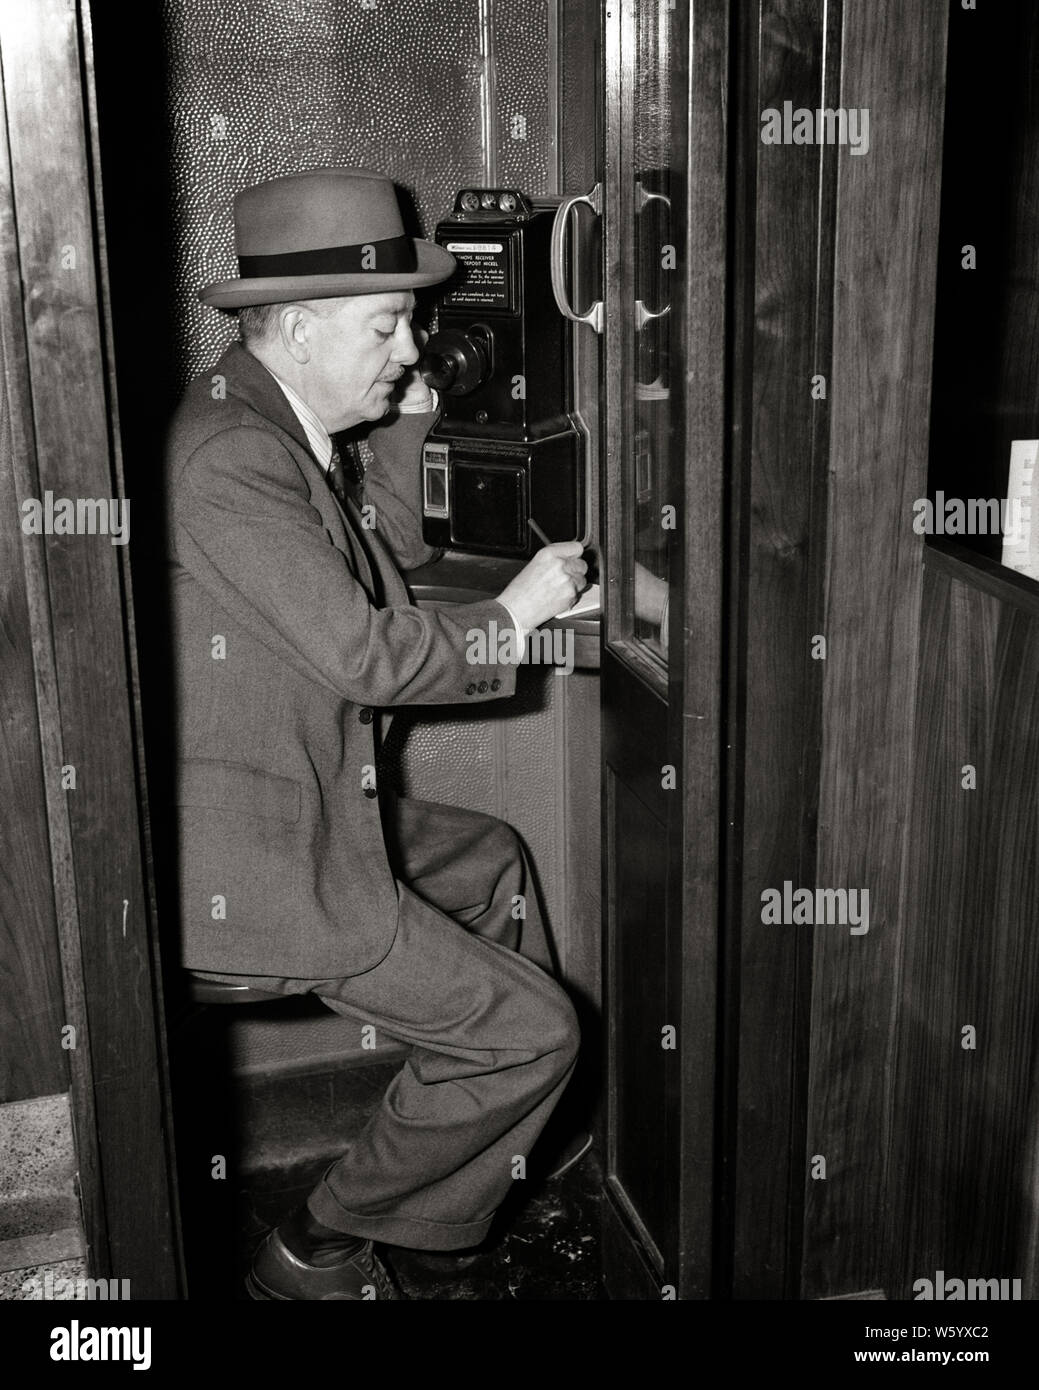 1940s MATURE MAN SITTING IN PAY TELEPHONE BOOTH TALKING ON PHONE AND TAKING WRITING NOTE NEW YORK CITY USA  - q40241 CPC001 HARS COMMUNICATING UNITED STATES COPY SPACE HALF-LENGTH PERSONS UNITED STATES OF AMERICA MALES MIDDLE-AGED B&W MIDDLE-AGED MAN SUIT AND TIE SELLING BOOTH DISCOVERY PAY AND OPPORTUNITY NYC OCCUPATIONS PHONES BOOKIE CONNECTION NEW YORK TELEPHONES CITIES STYLISH NEW YORK CITY COMMUNICATIONS COOPERATION SALESMEN BLACK AND WHITE CAUCASIAN ETHNICITY OLD FASHIONED Stock Photo